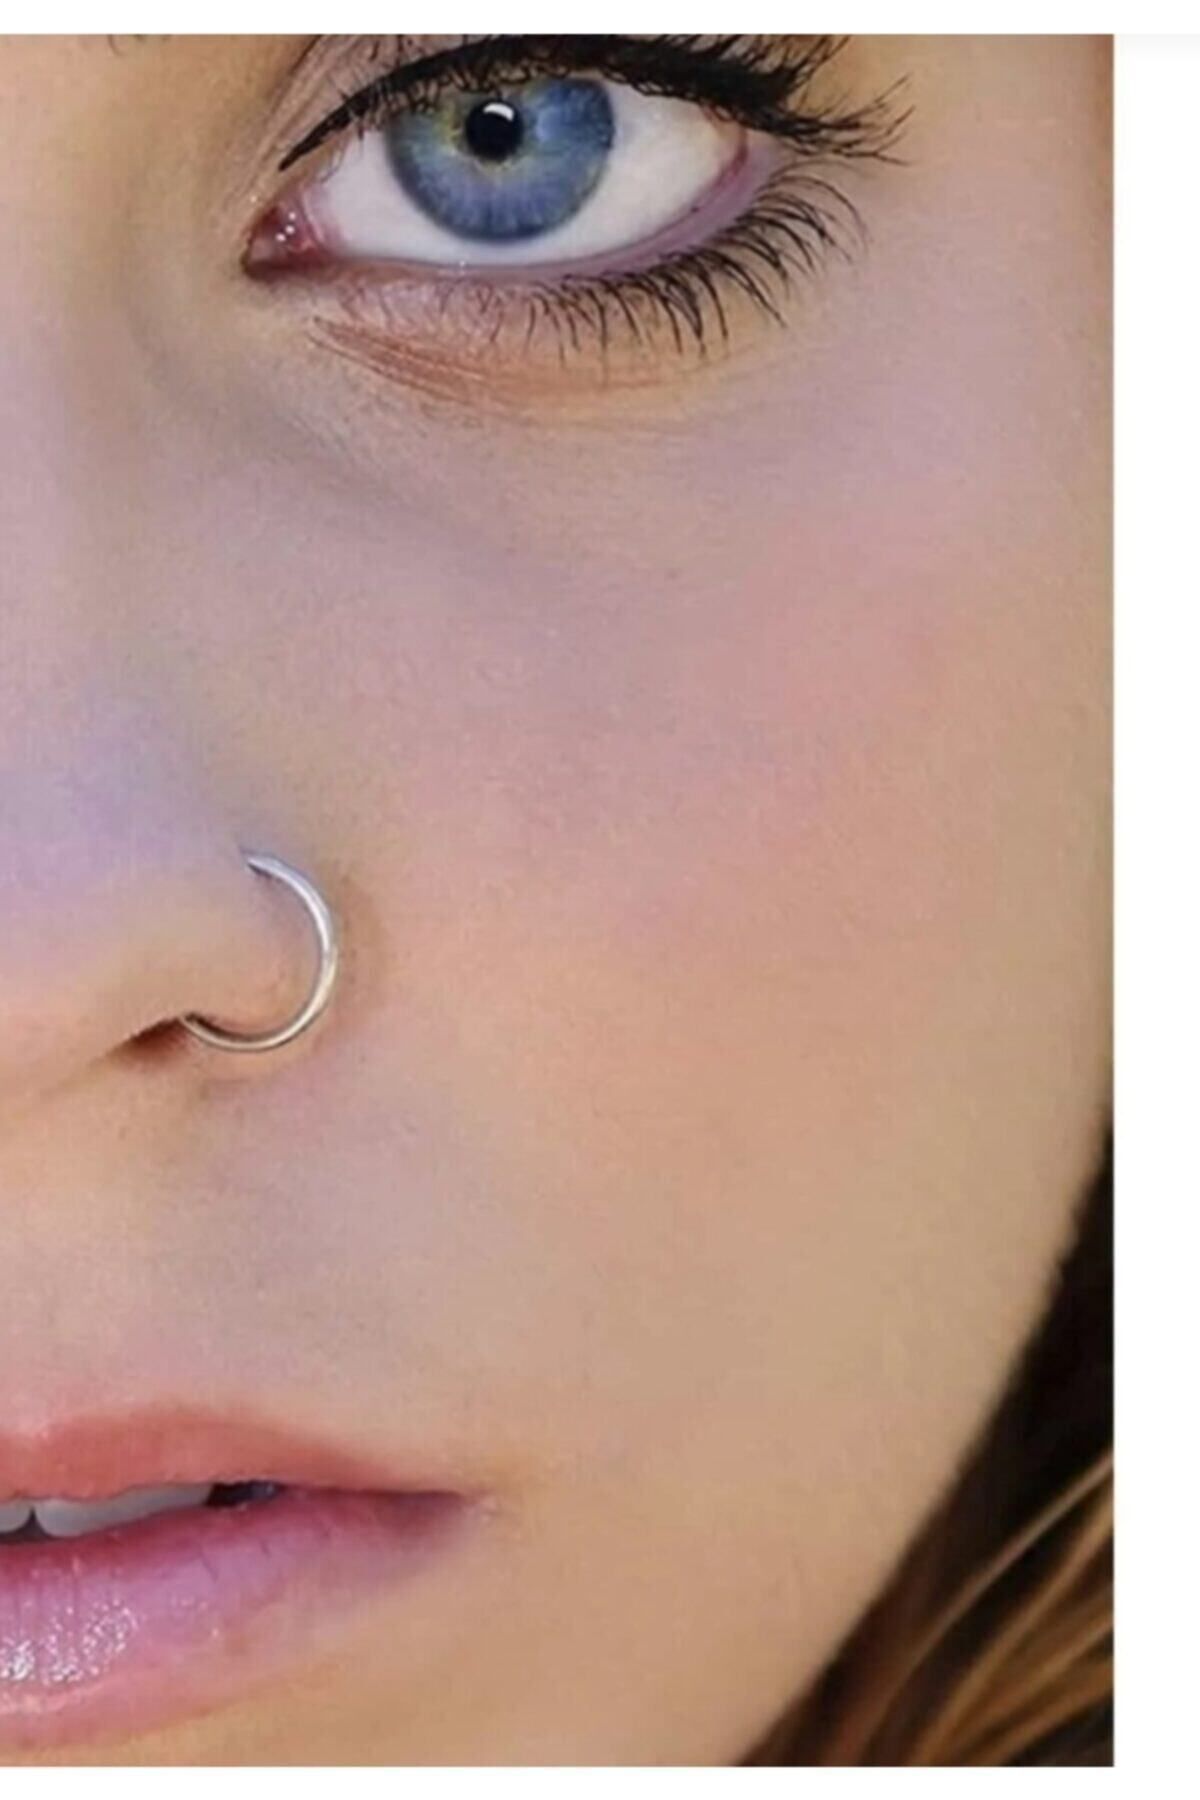 Nose Piercings Explained: Cost, Pain Level, and Placement Options